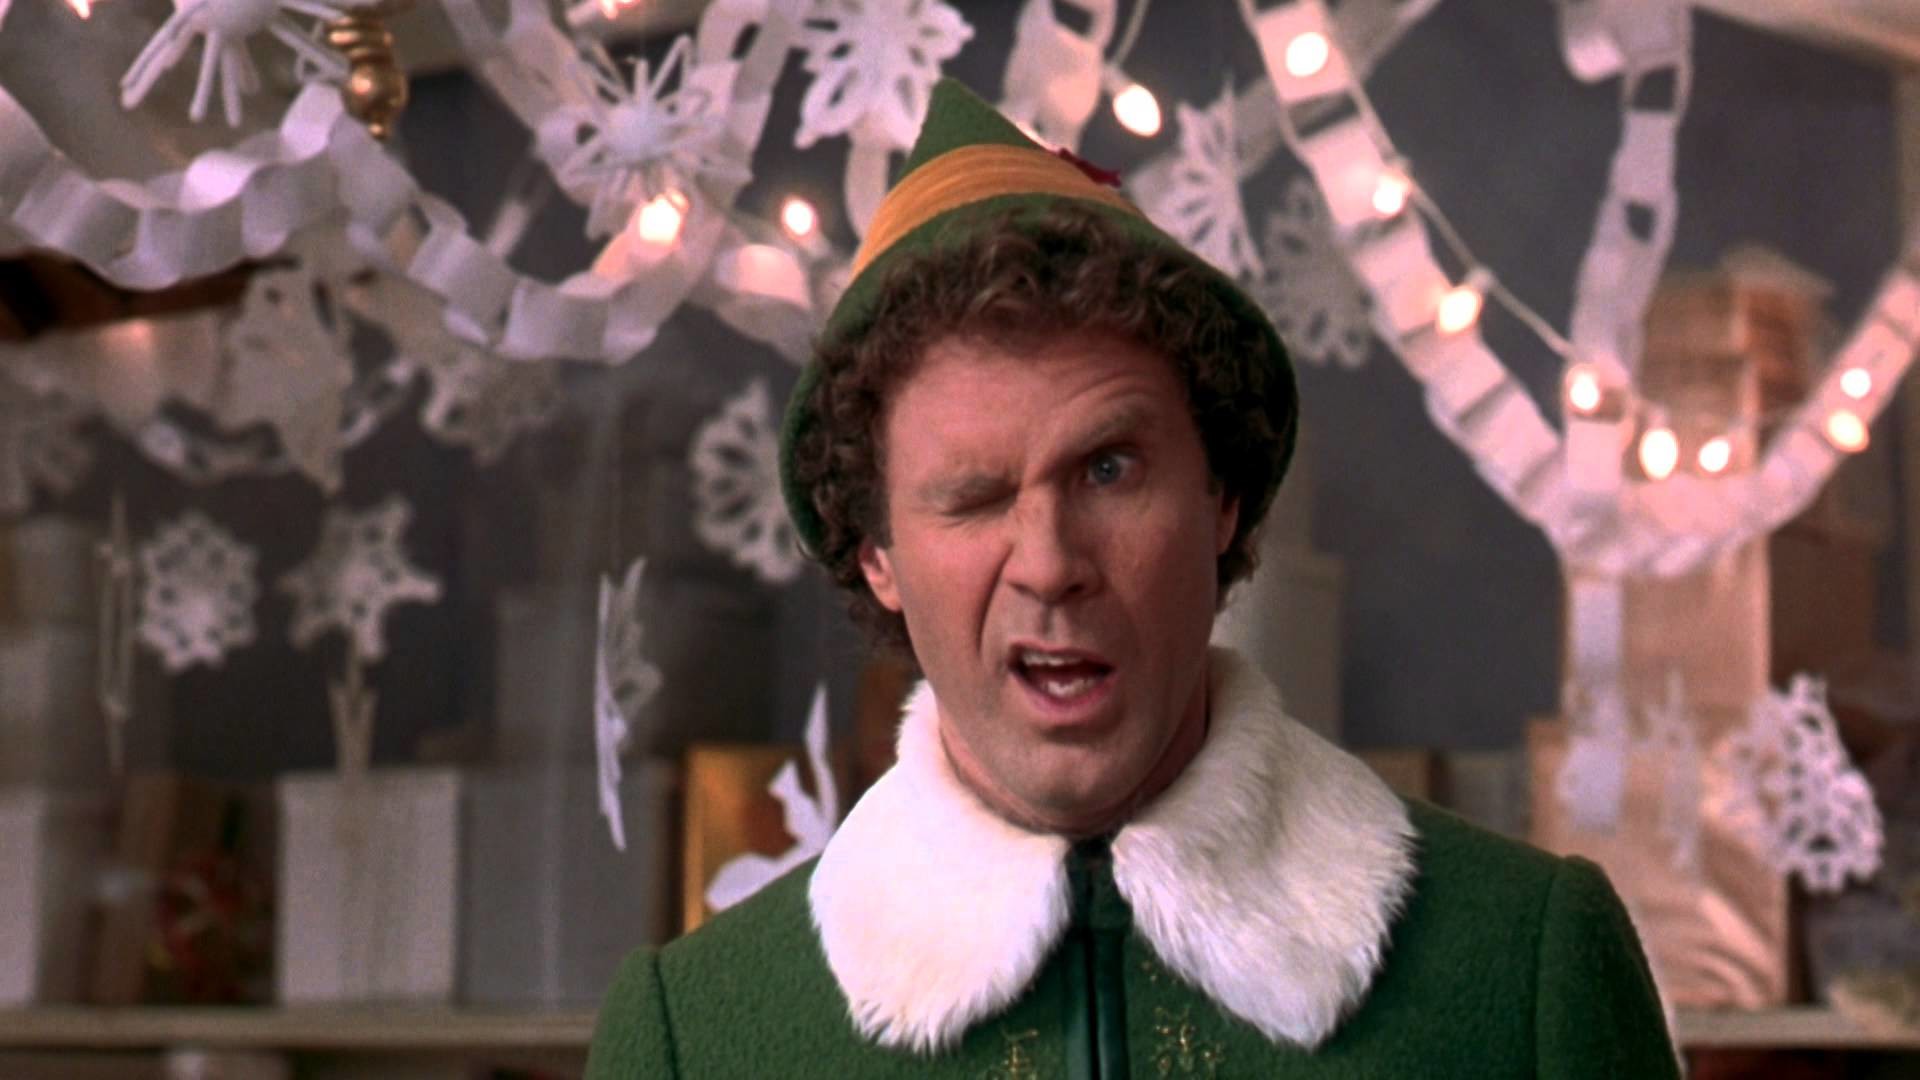 Buddy The Elf Wallpaper (41+ images)